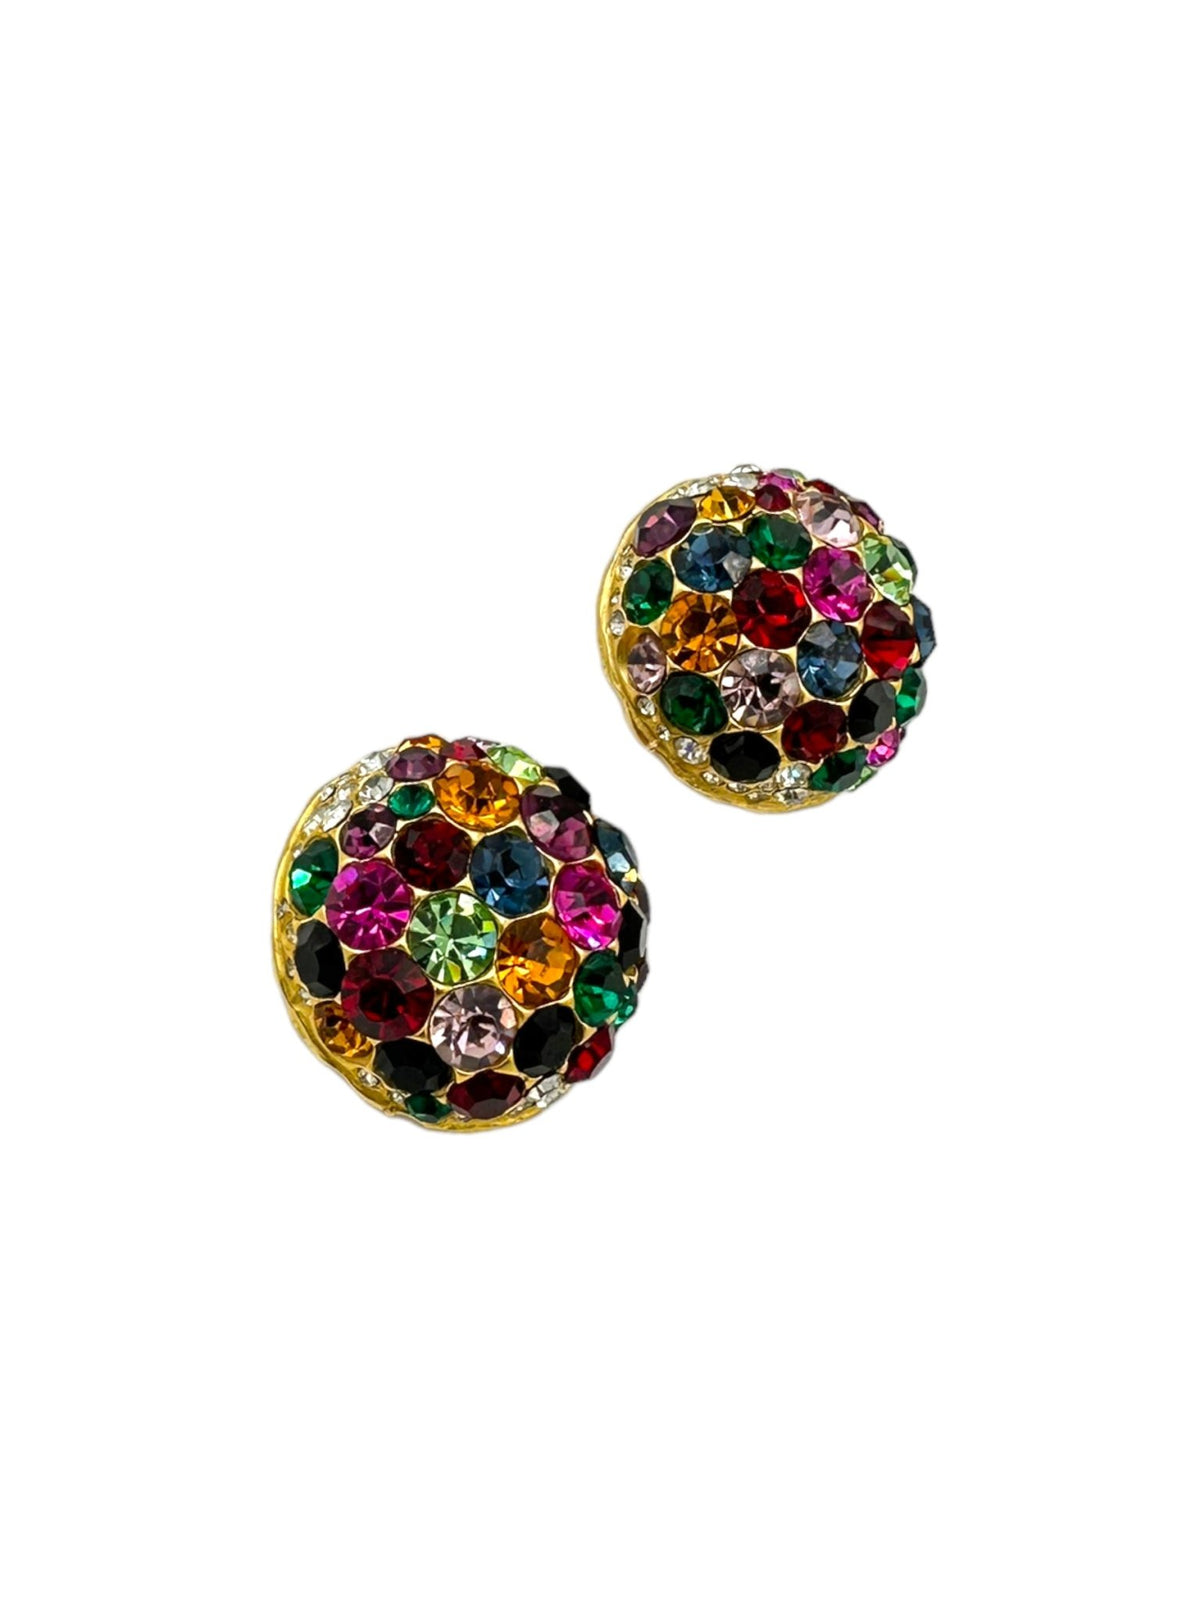 Blanca Gold Round Multi-Color Rhinestone Vintage Statement Clip-On Earrings - 24 Wishes Vintage Jewelry